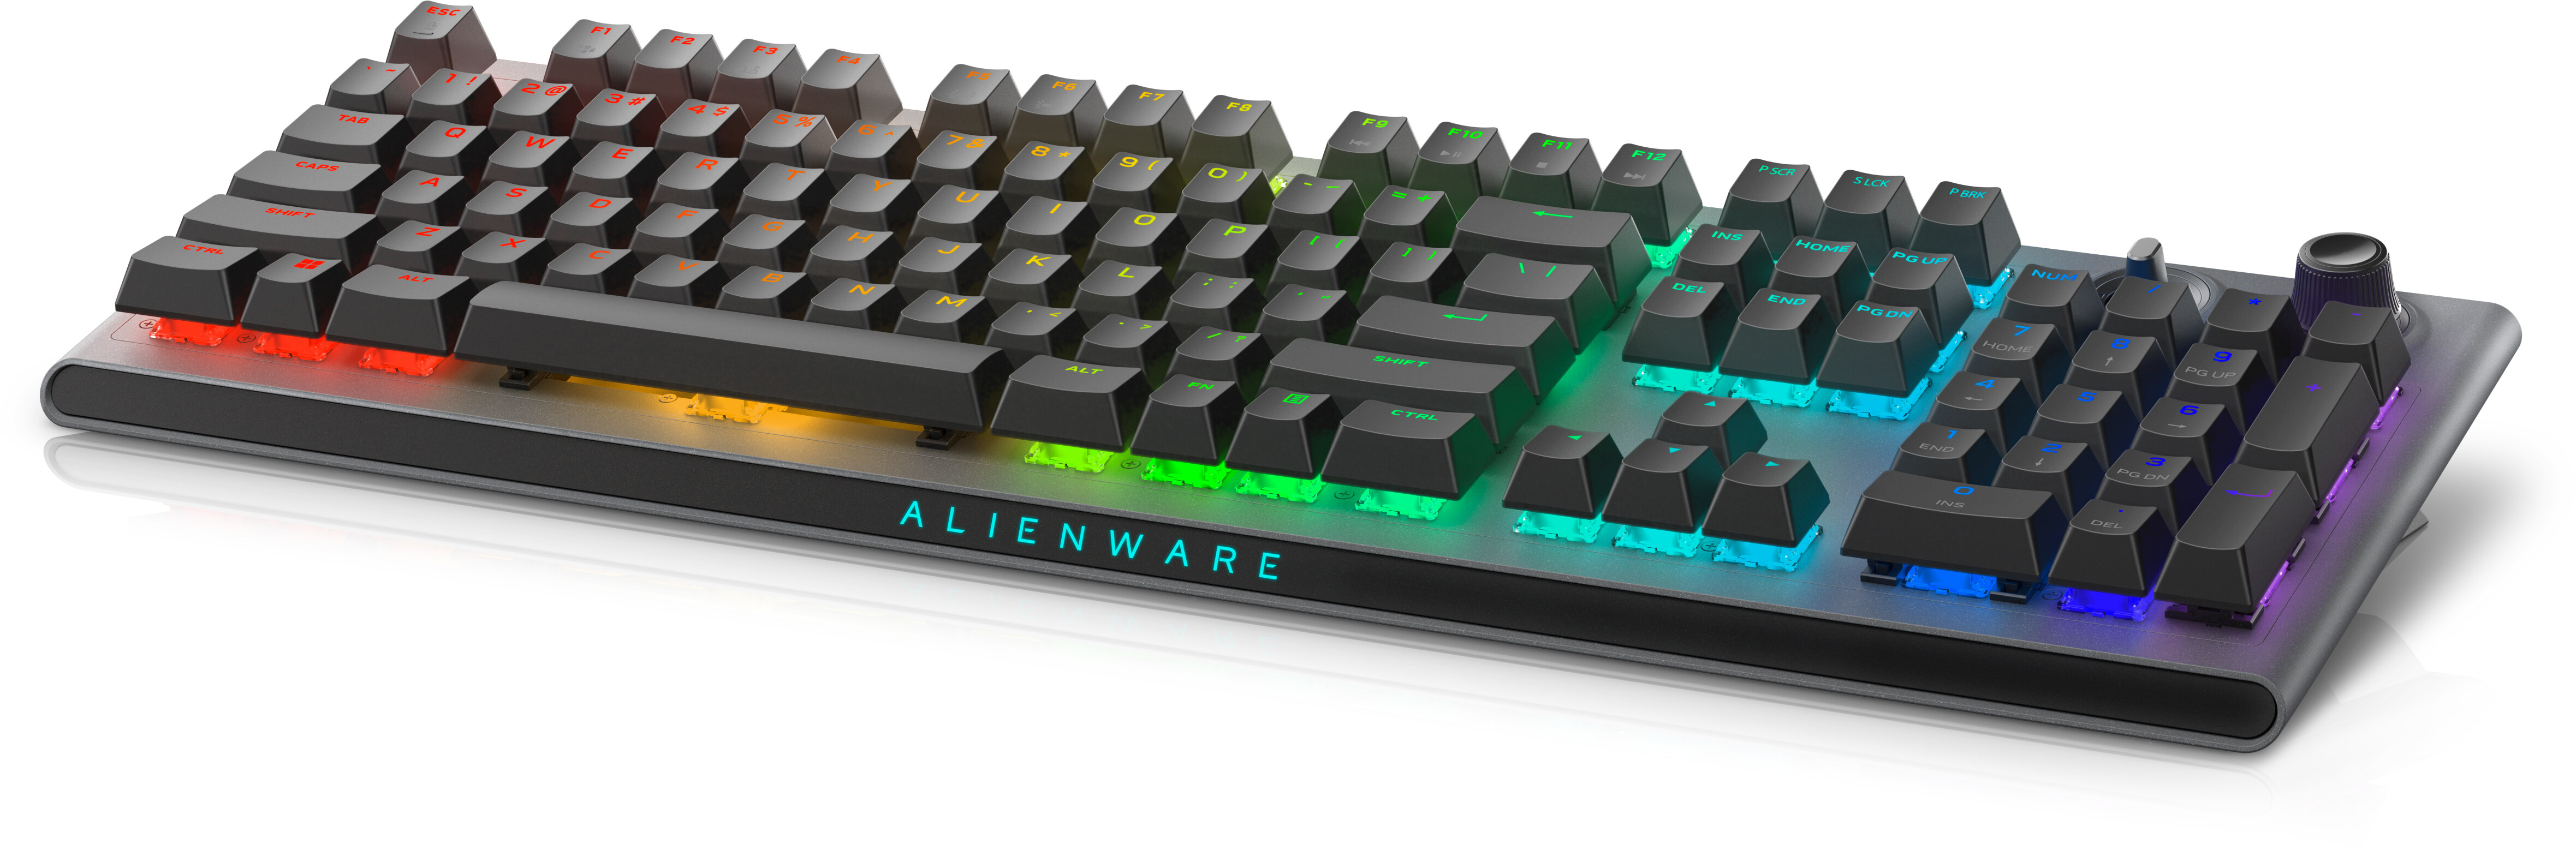 https://i.dell.com/is/image/DellContent/content/dam/ss2/product-images/peripherals/alienware/peripherals/alienware-trimode-920k-wireless-keyboard/media-gallery/dsotm/keyboard-alienware-aw920k-black-gallery-4.psd?fmt=pjpg&pscan=auto&scl=1&wid=4719&hei=1558&qlt=100,1&resMode=sharp2&size=4719,1558&chrss=full&imwidth=5000